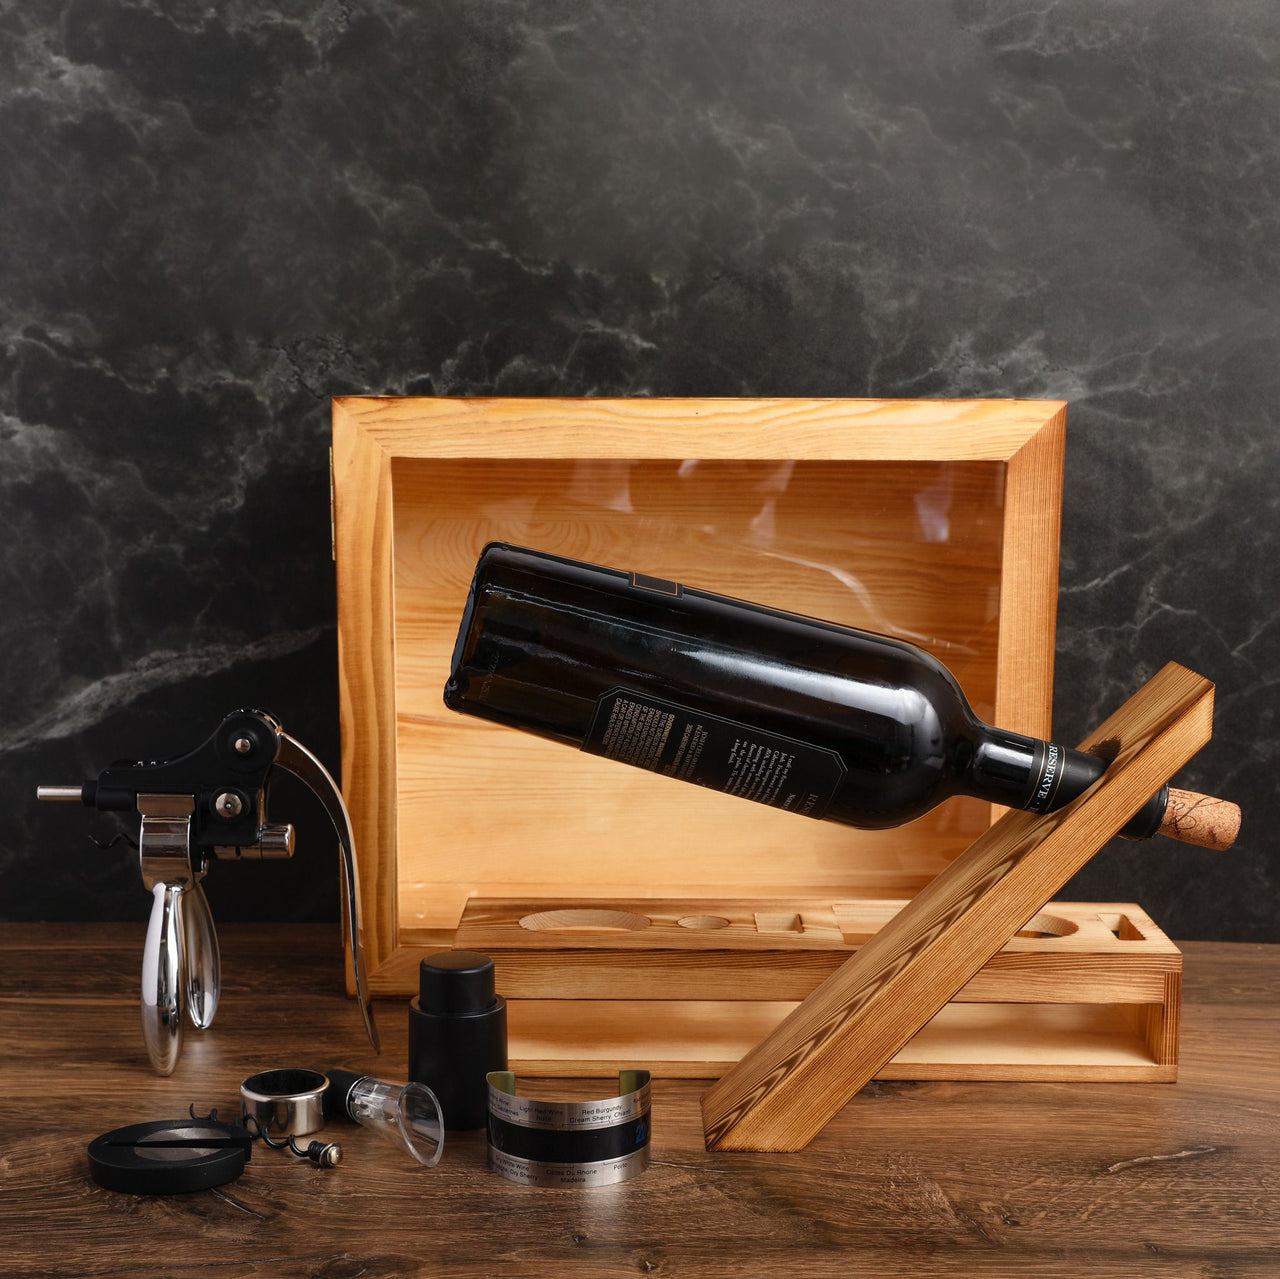 Personalized WineBox - Luxurious and complete wine set